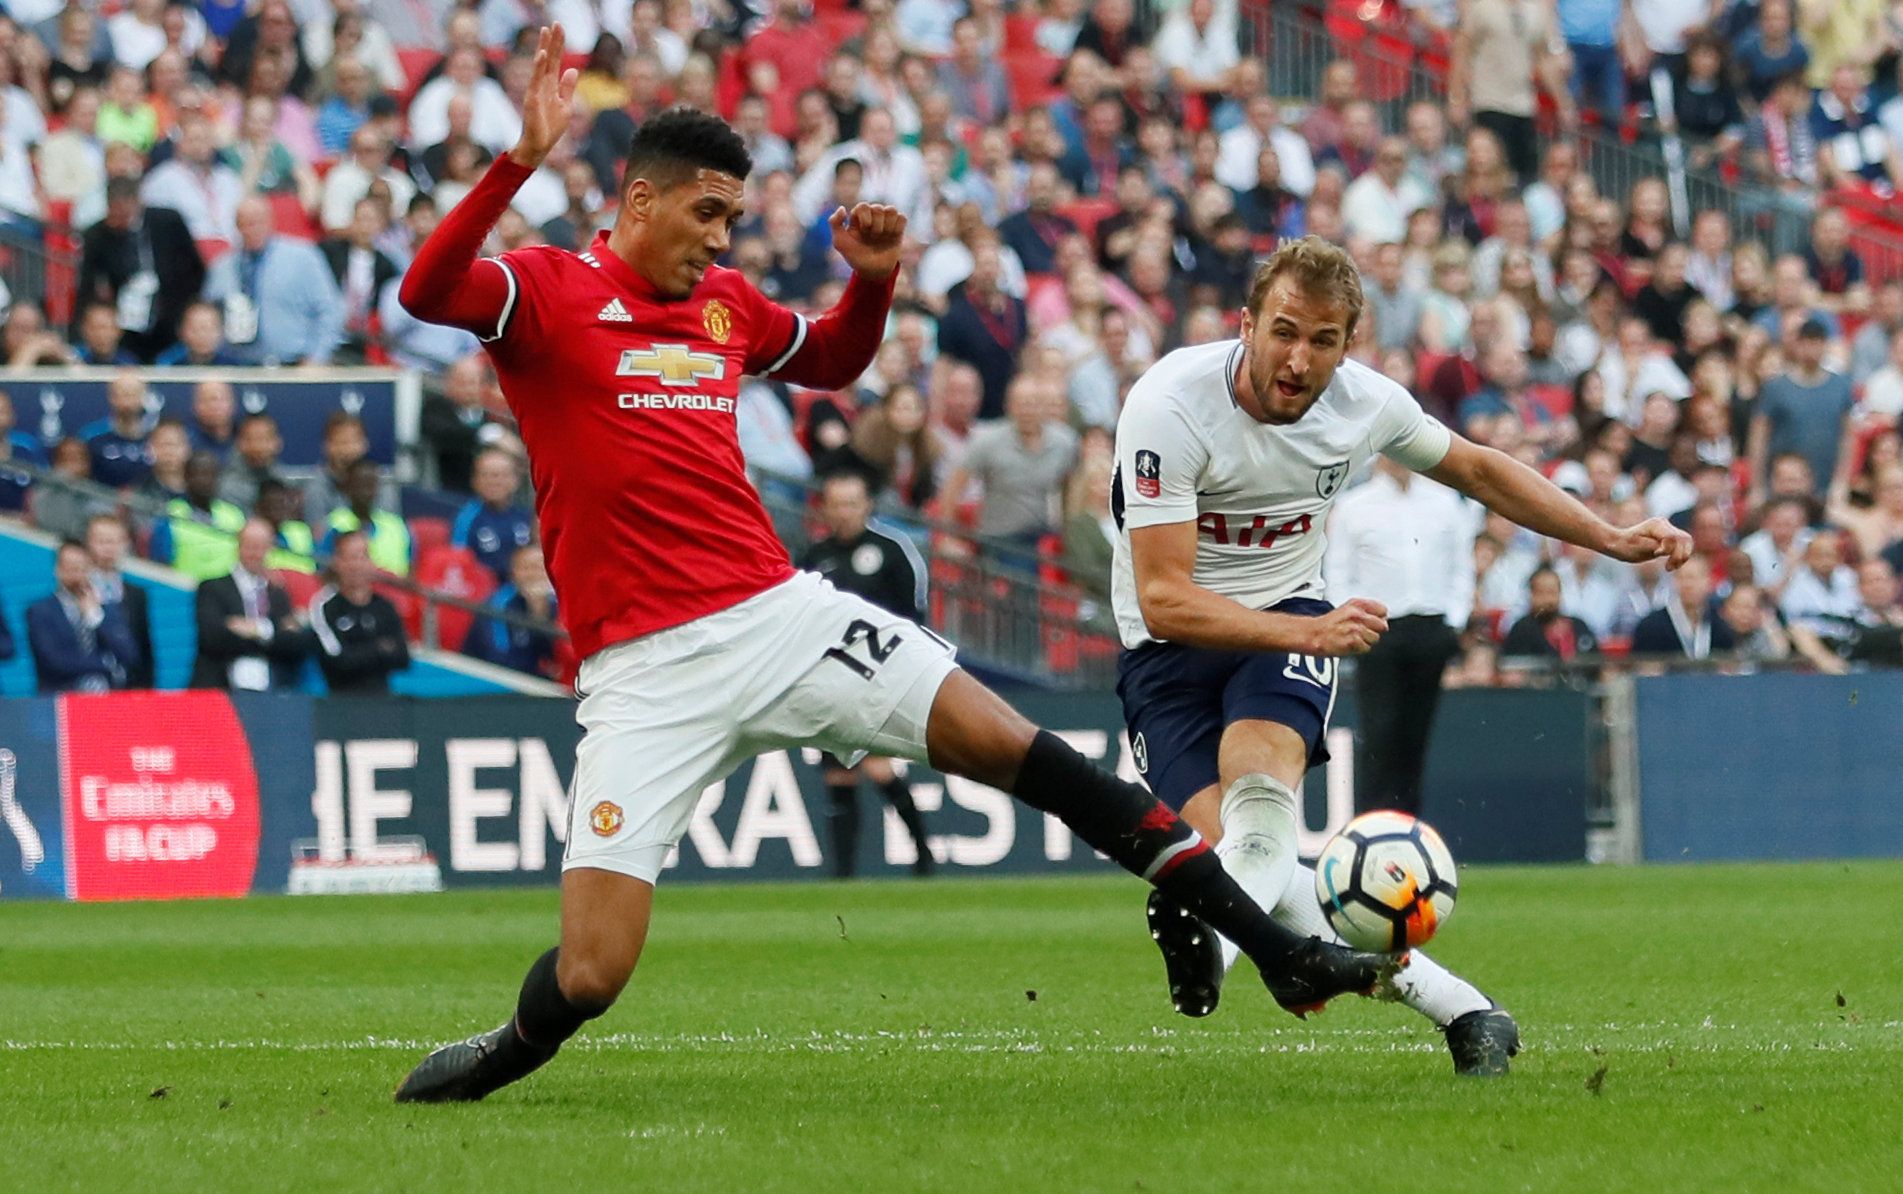 Soccer Football -  FA Cup Semi-Final - Manchester United v Tottenham Hotspur  - Wembley Stadium, London, Britain - April 21, 2018   Tottenham's Harry Kane in action with Manchester United's Chris Smalling   REUTERS/David Klein